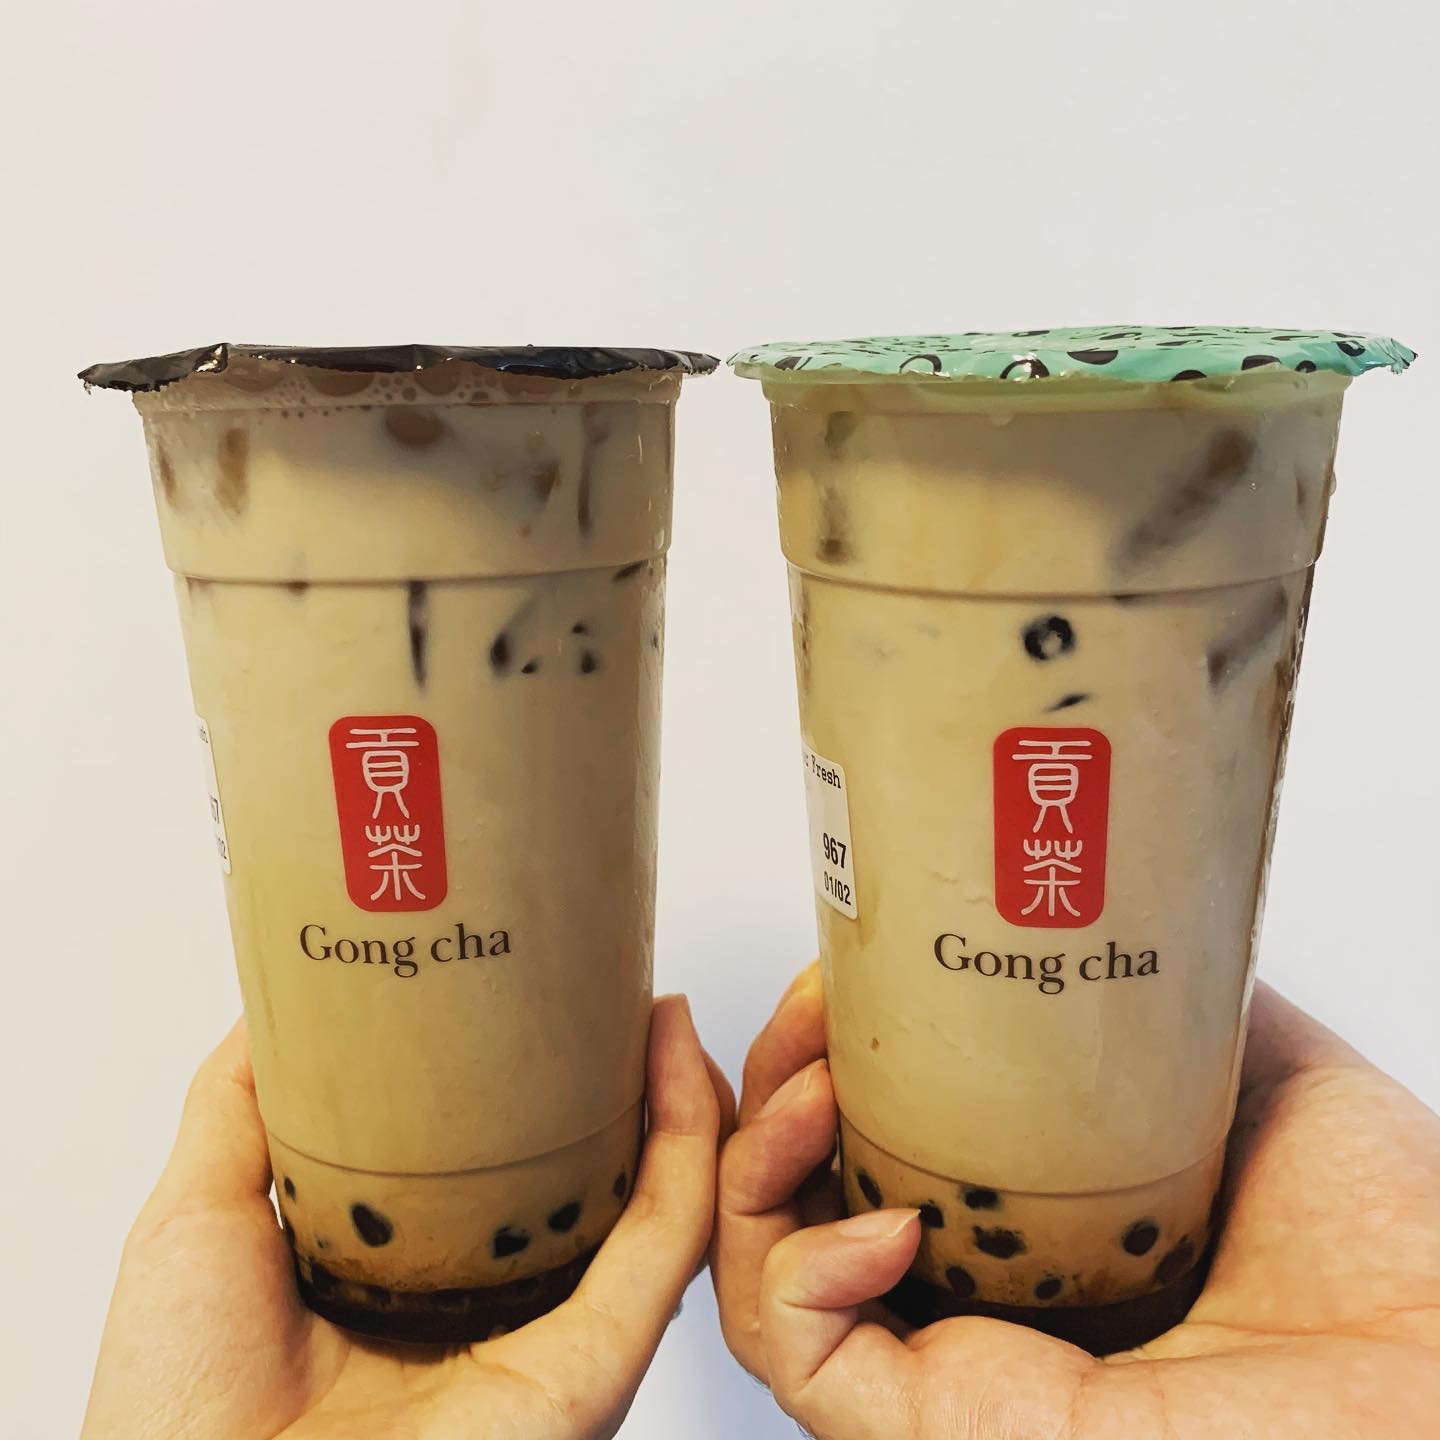 【1 for 1】Gong cha 